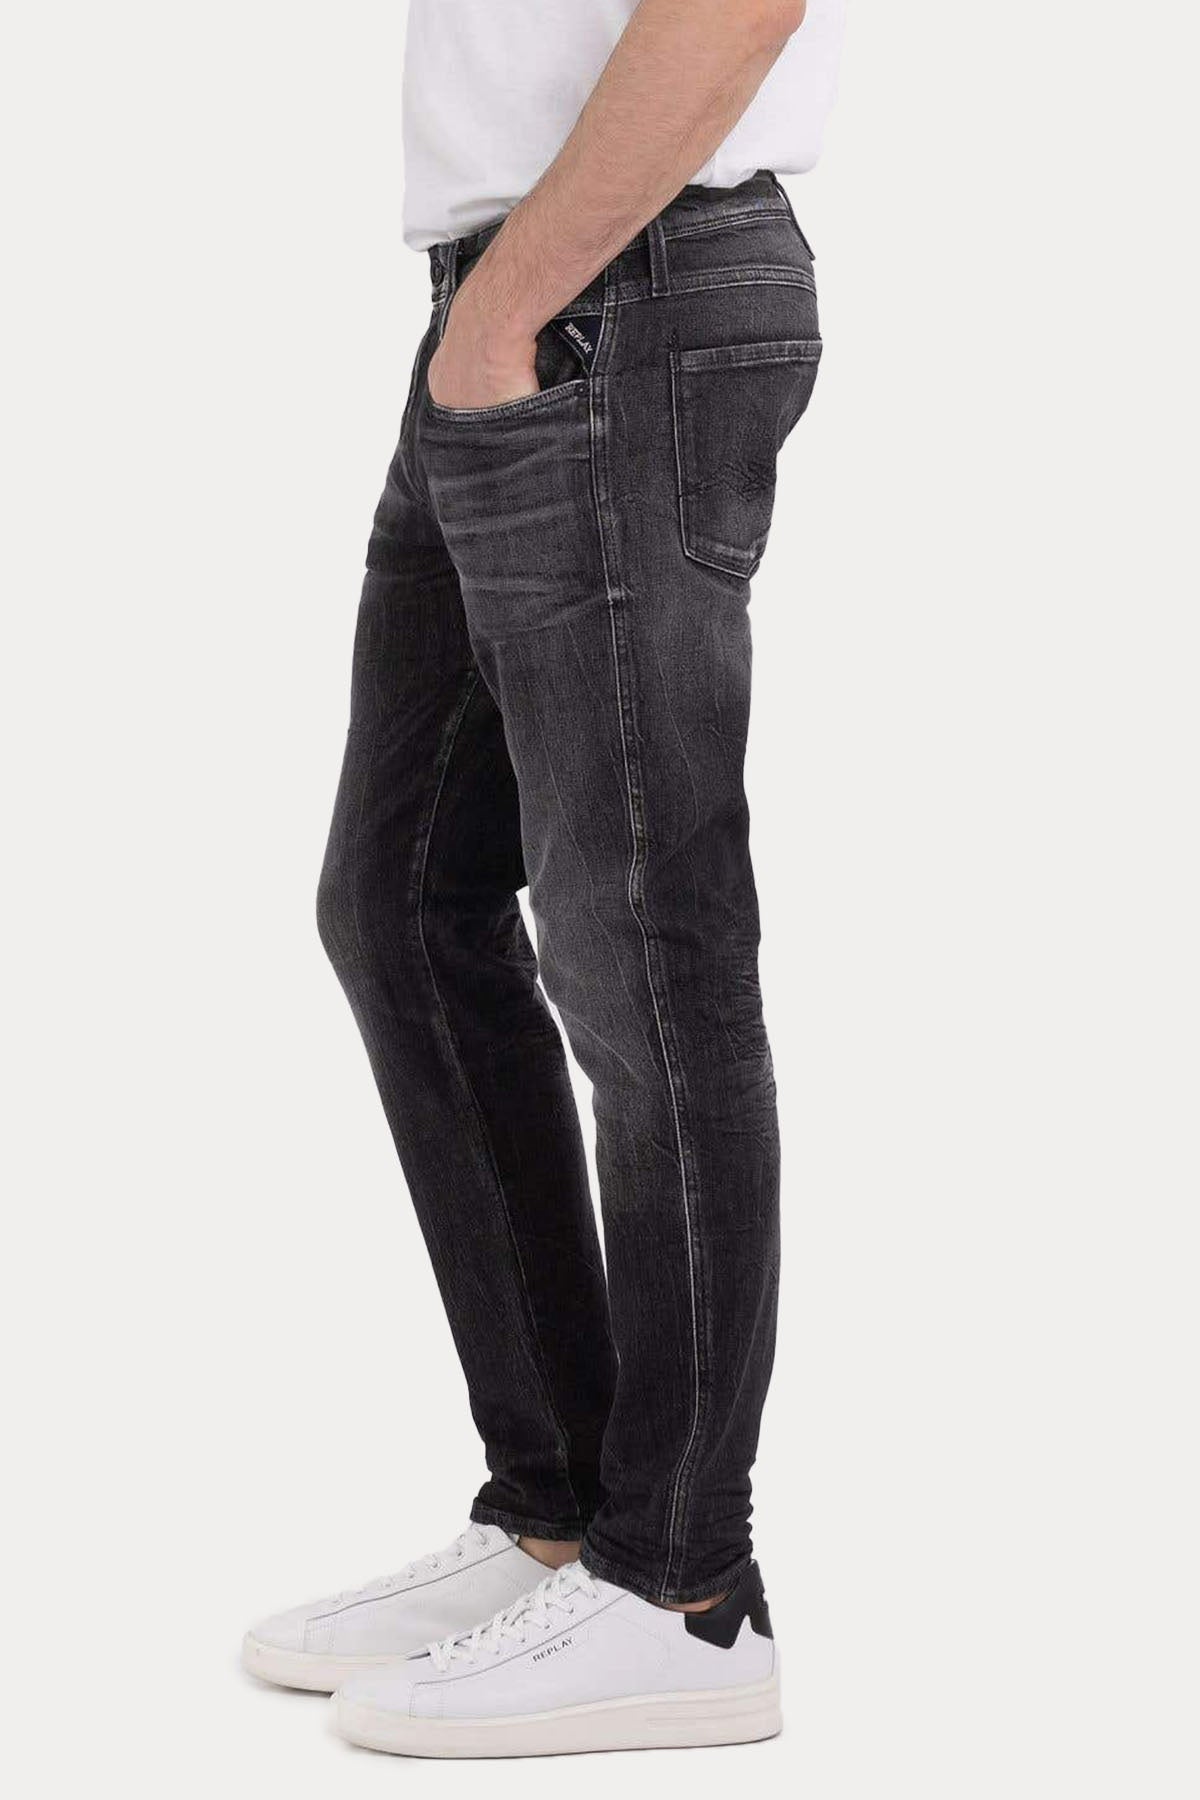 Replay Bronny Super Slim Fit Jeans-Libas Trendy Fashion Store